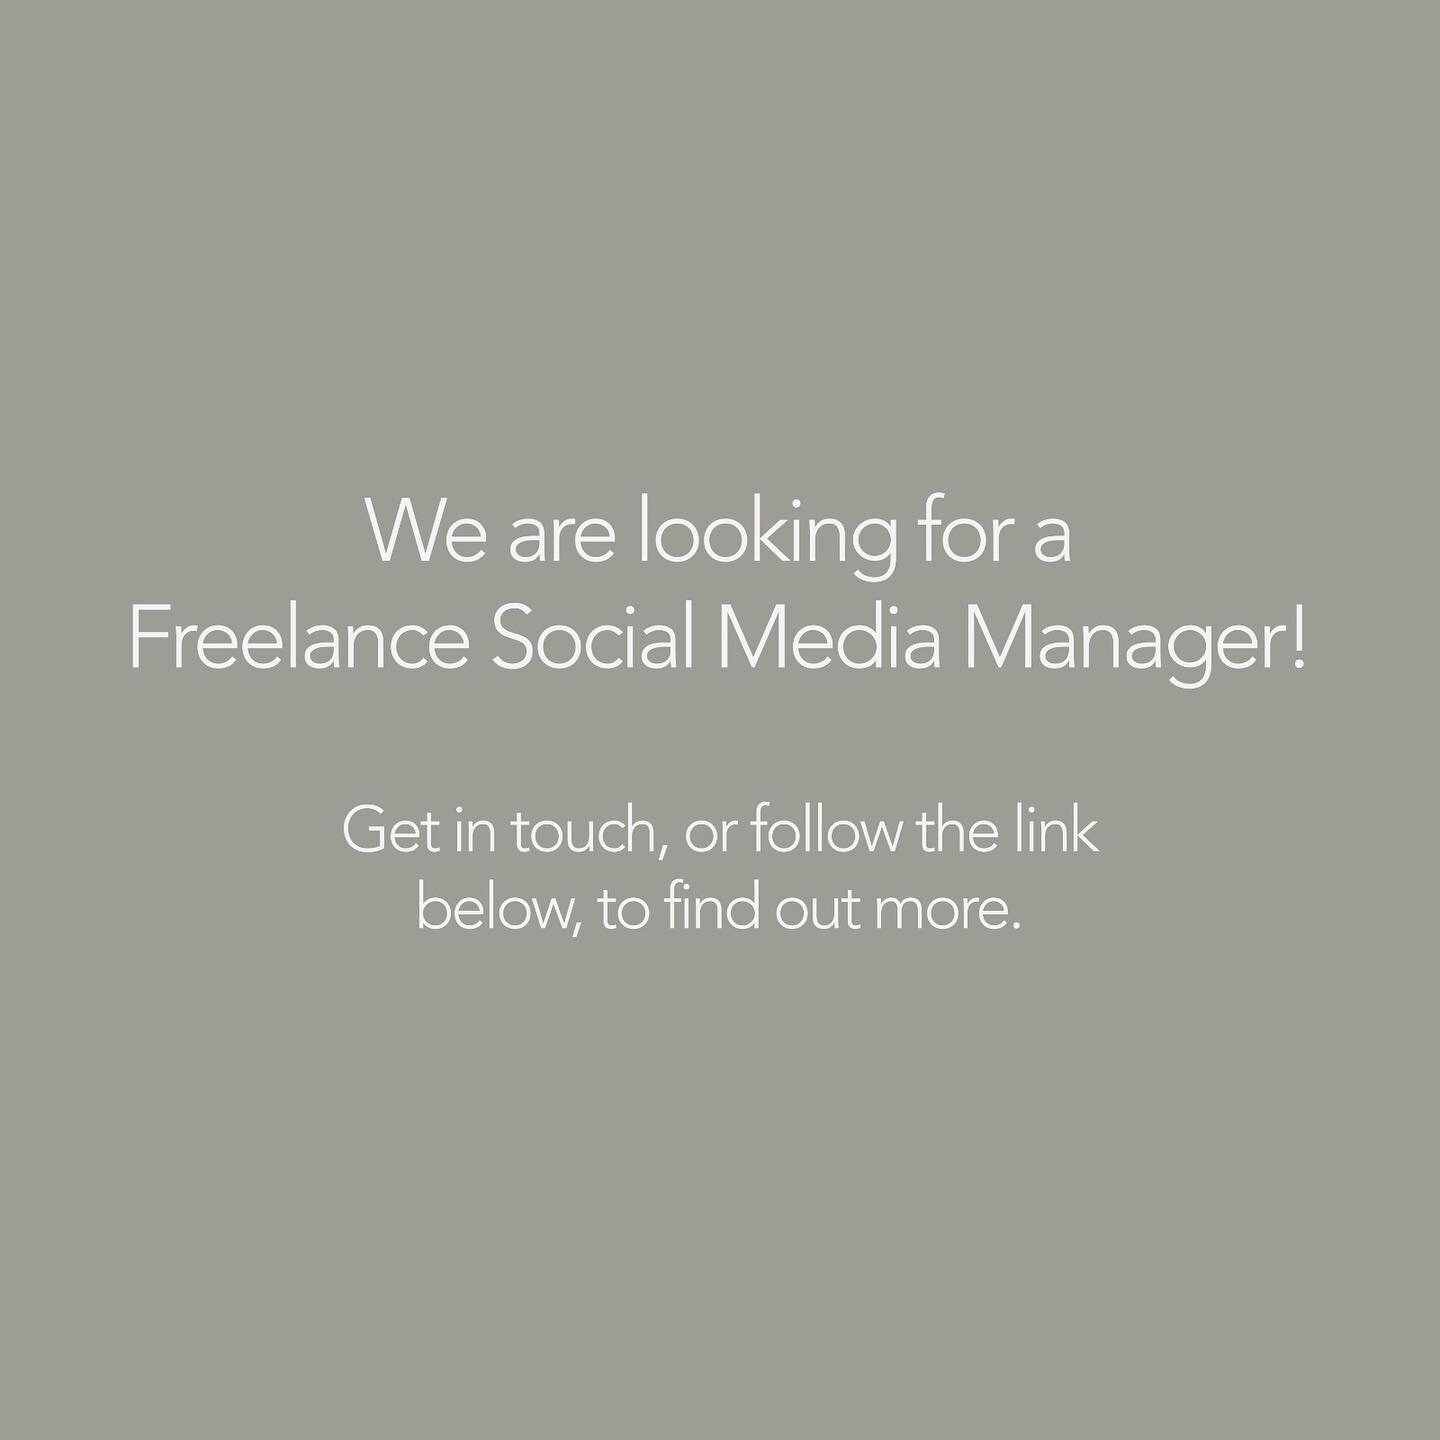 We&rsquo;re hiring!

As LuxeConsult continues to grow, we are looking to raise the profile of our media coverage and current work.

That&rsquo;s why we are now looking for a Social Media Manager (freelance) who will regularly update our social media 